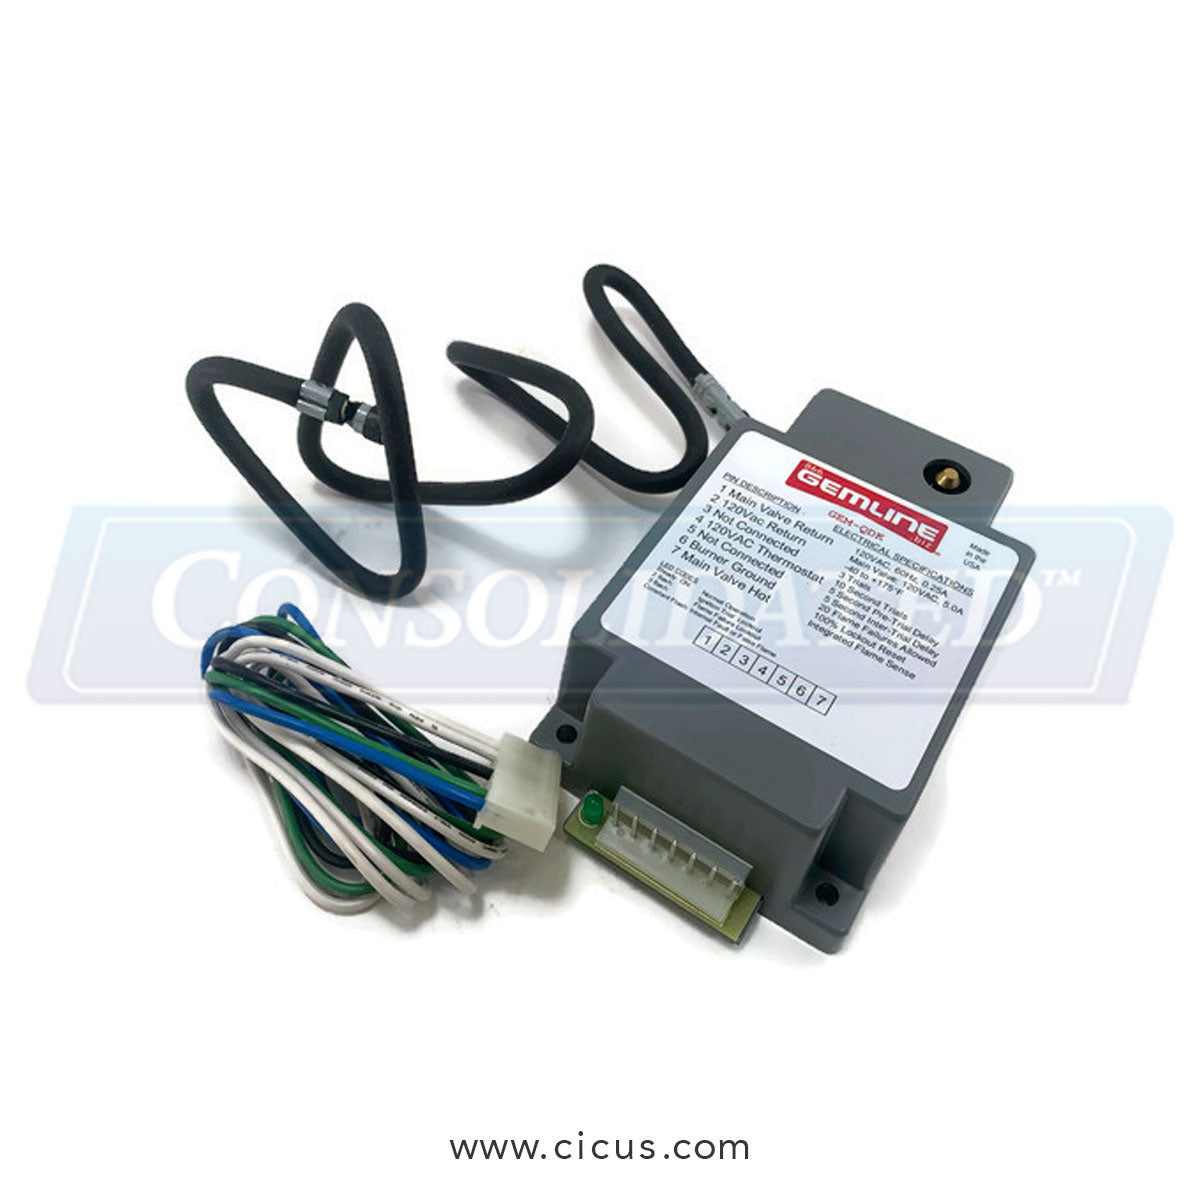 Cissell Conversion Kit - Glo-Bar to Electronic Ignition 120v [QDK]